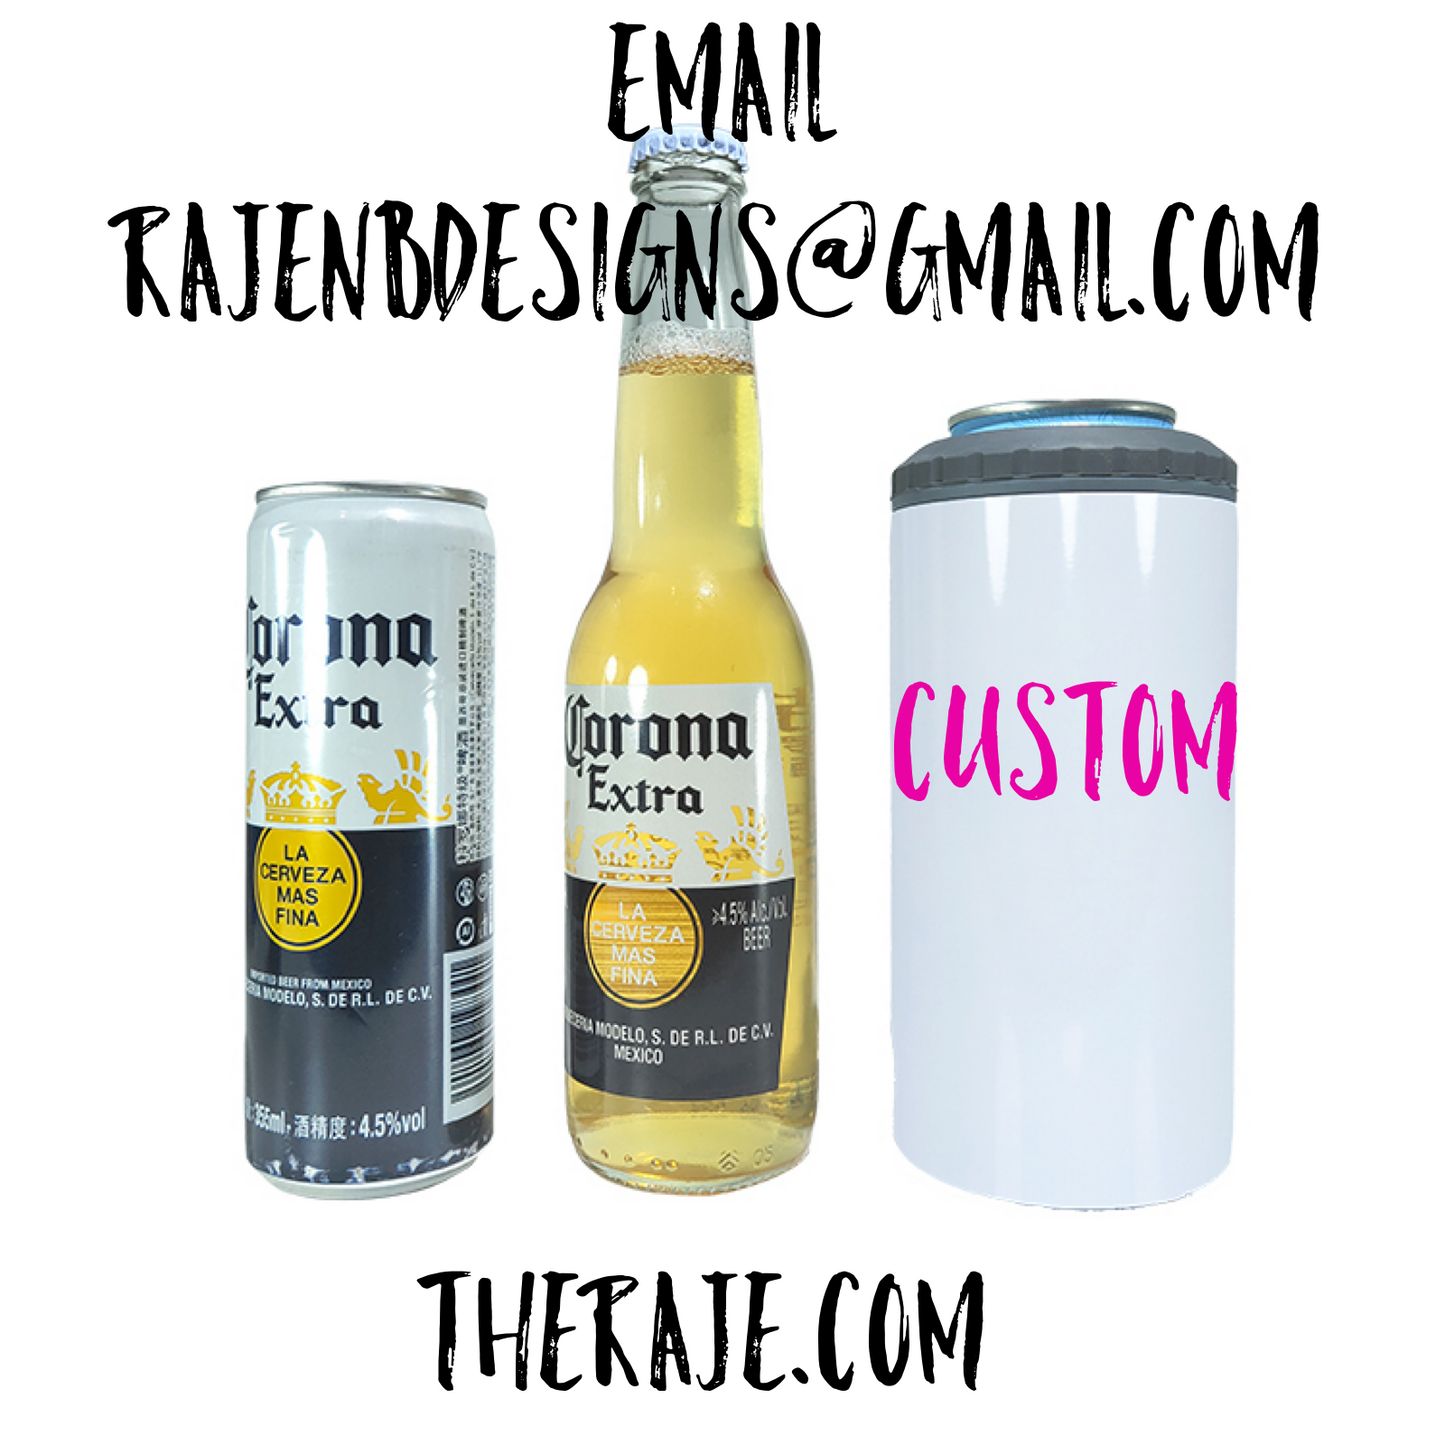 CUSTOM COMPLETED 16 oz 4 in 1 can/bottle0 cooler WHOLESALE